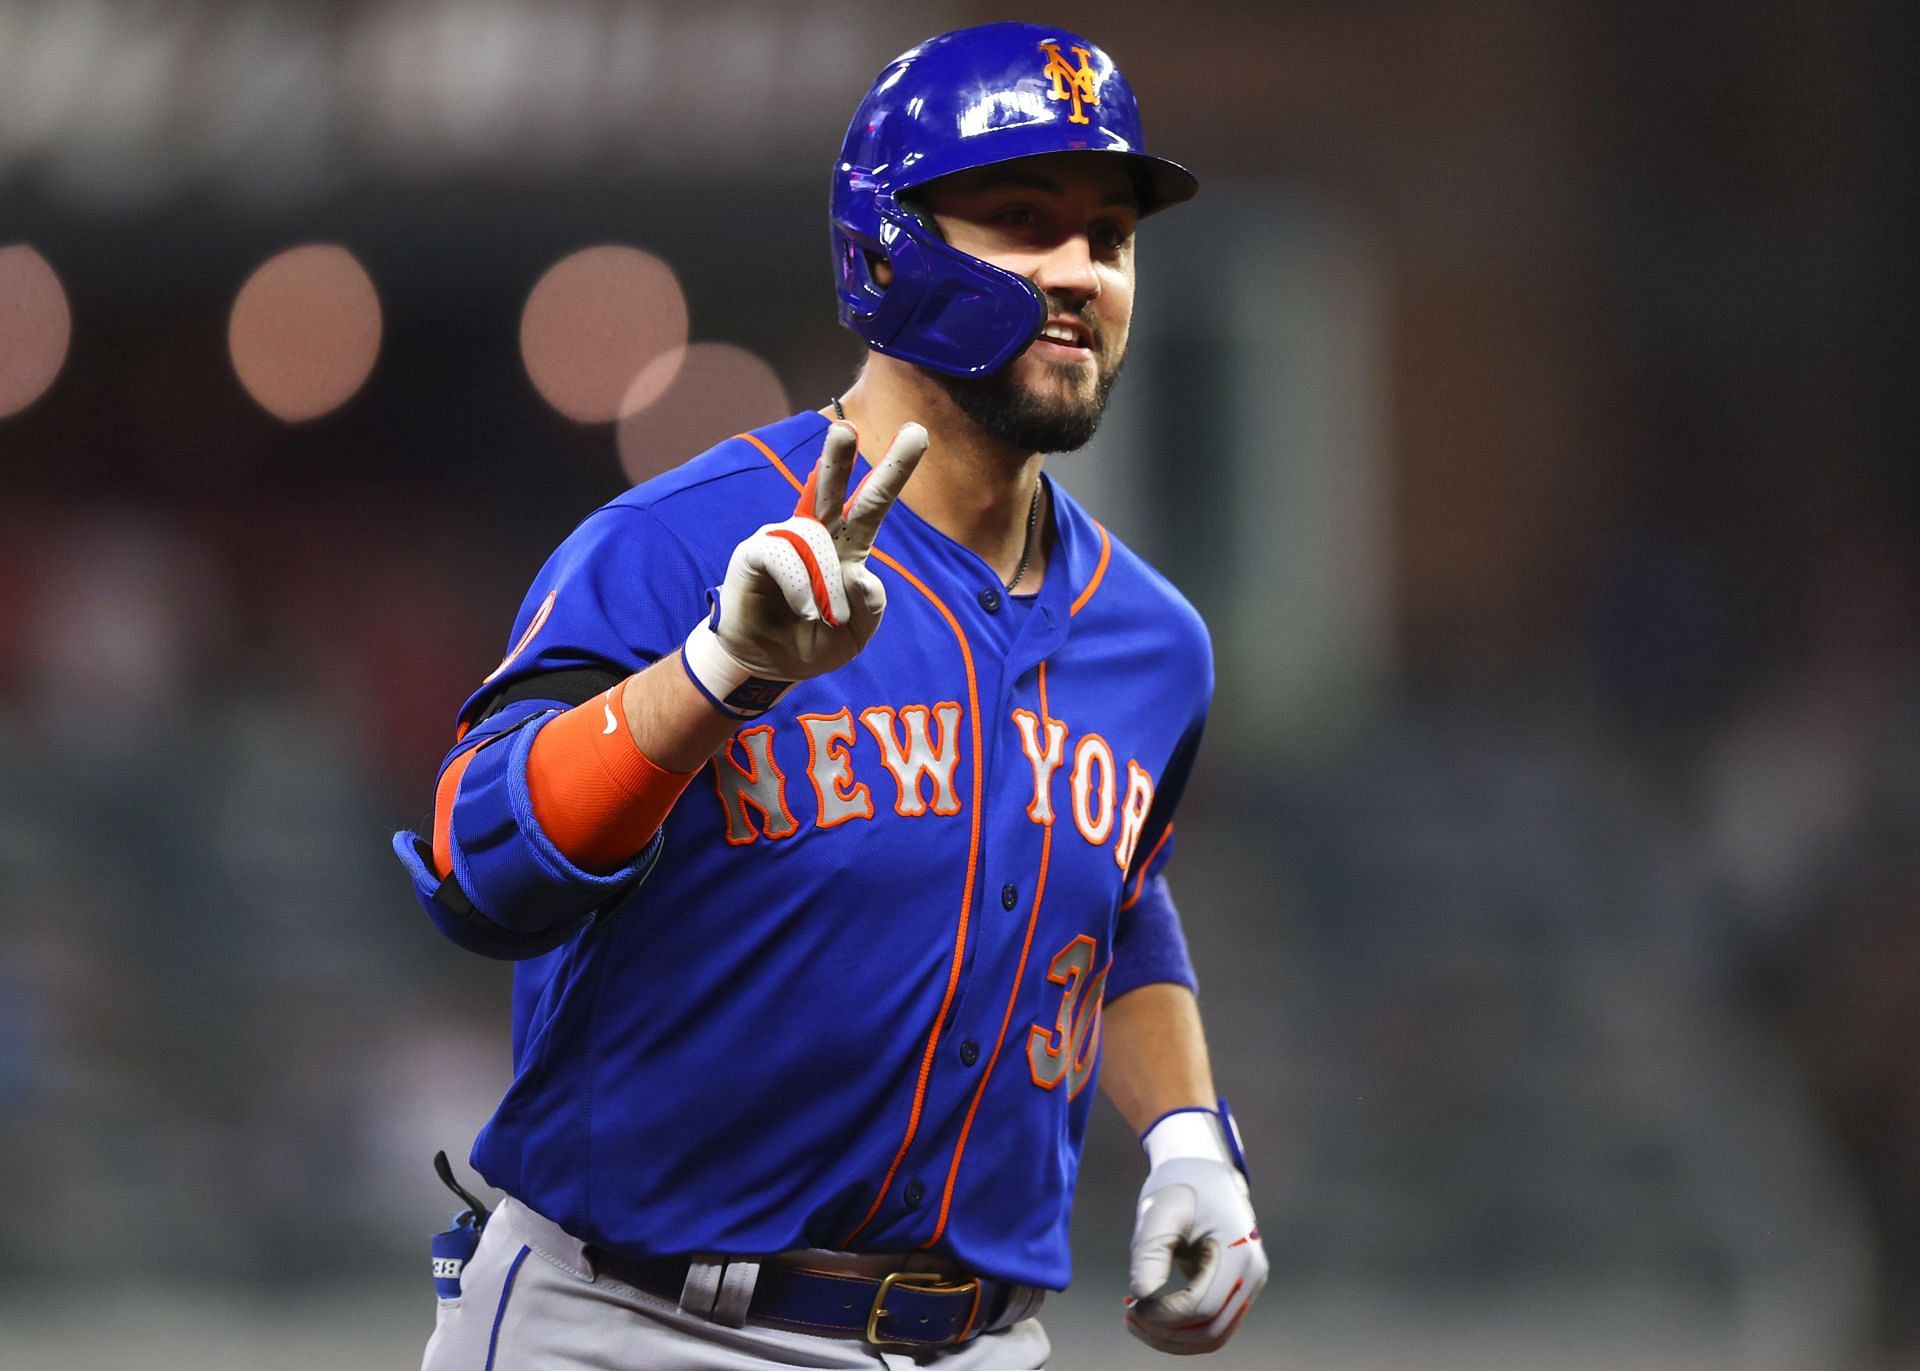 Michael Conforto's rise with New York Mets assisted by advice from